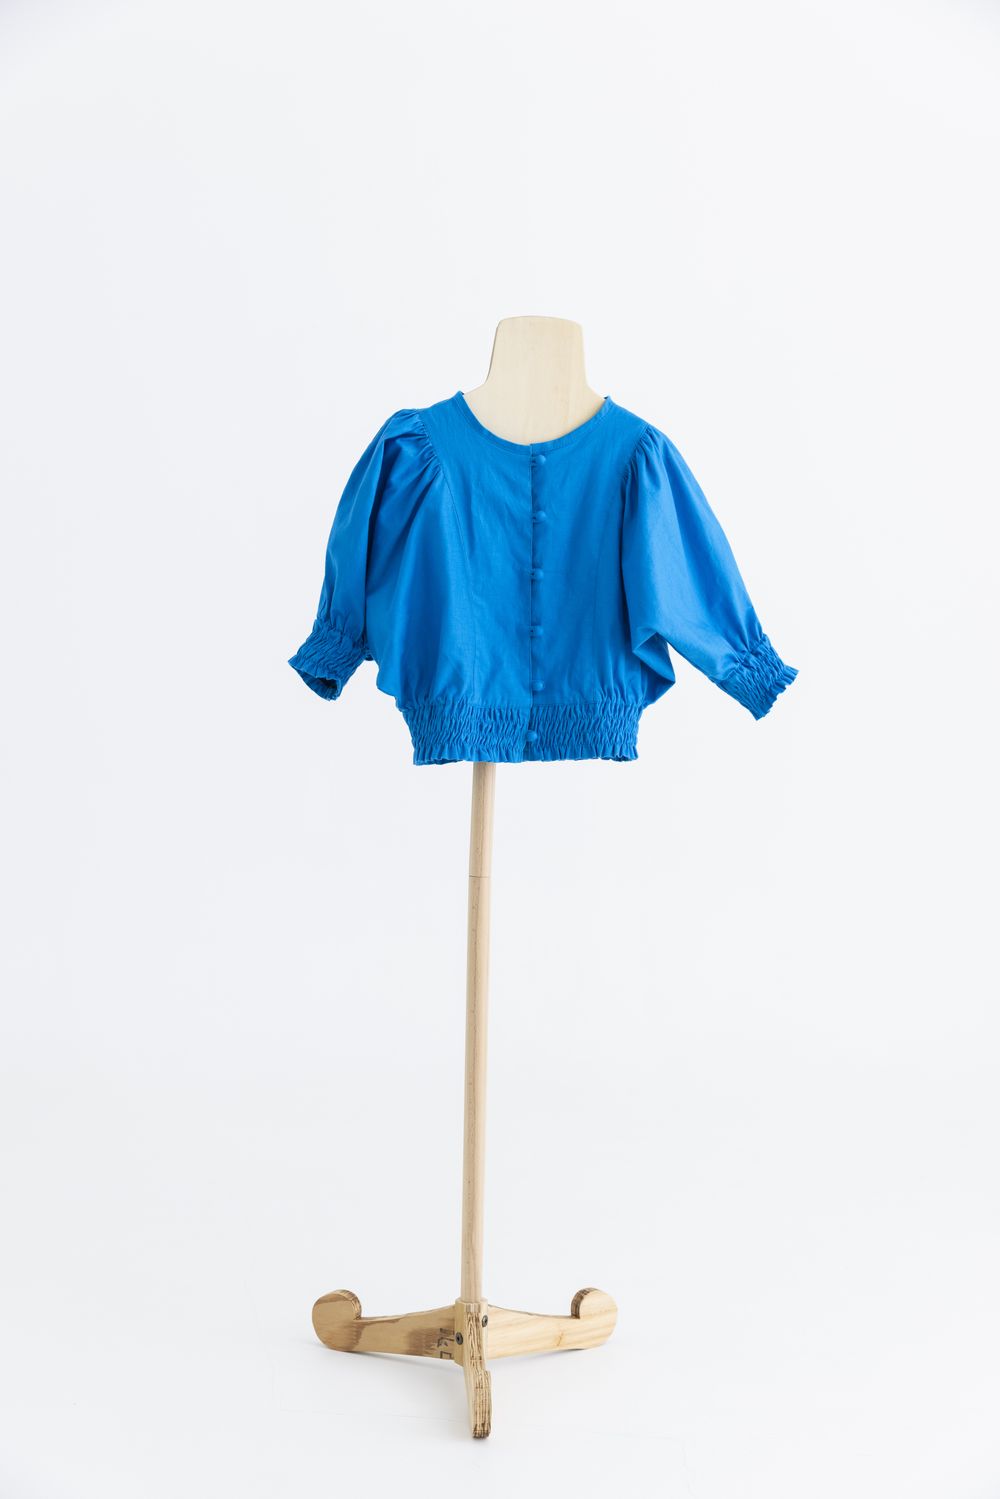 SALE/セール 50％OFF folkmade/フォークメイド melody cardigan(turquoise blue) f22ss020